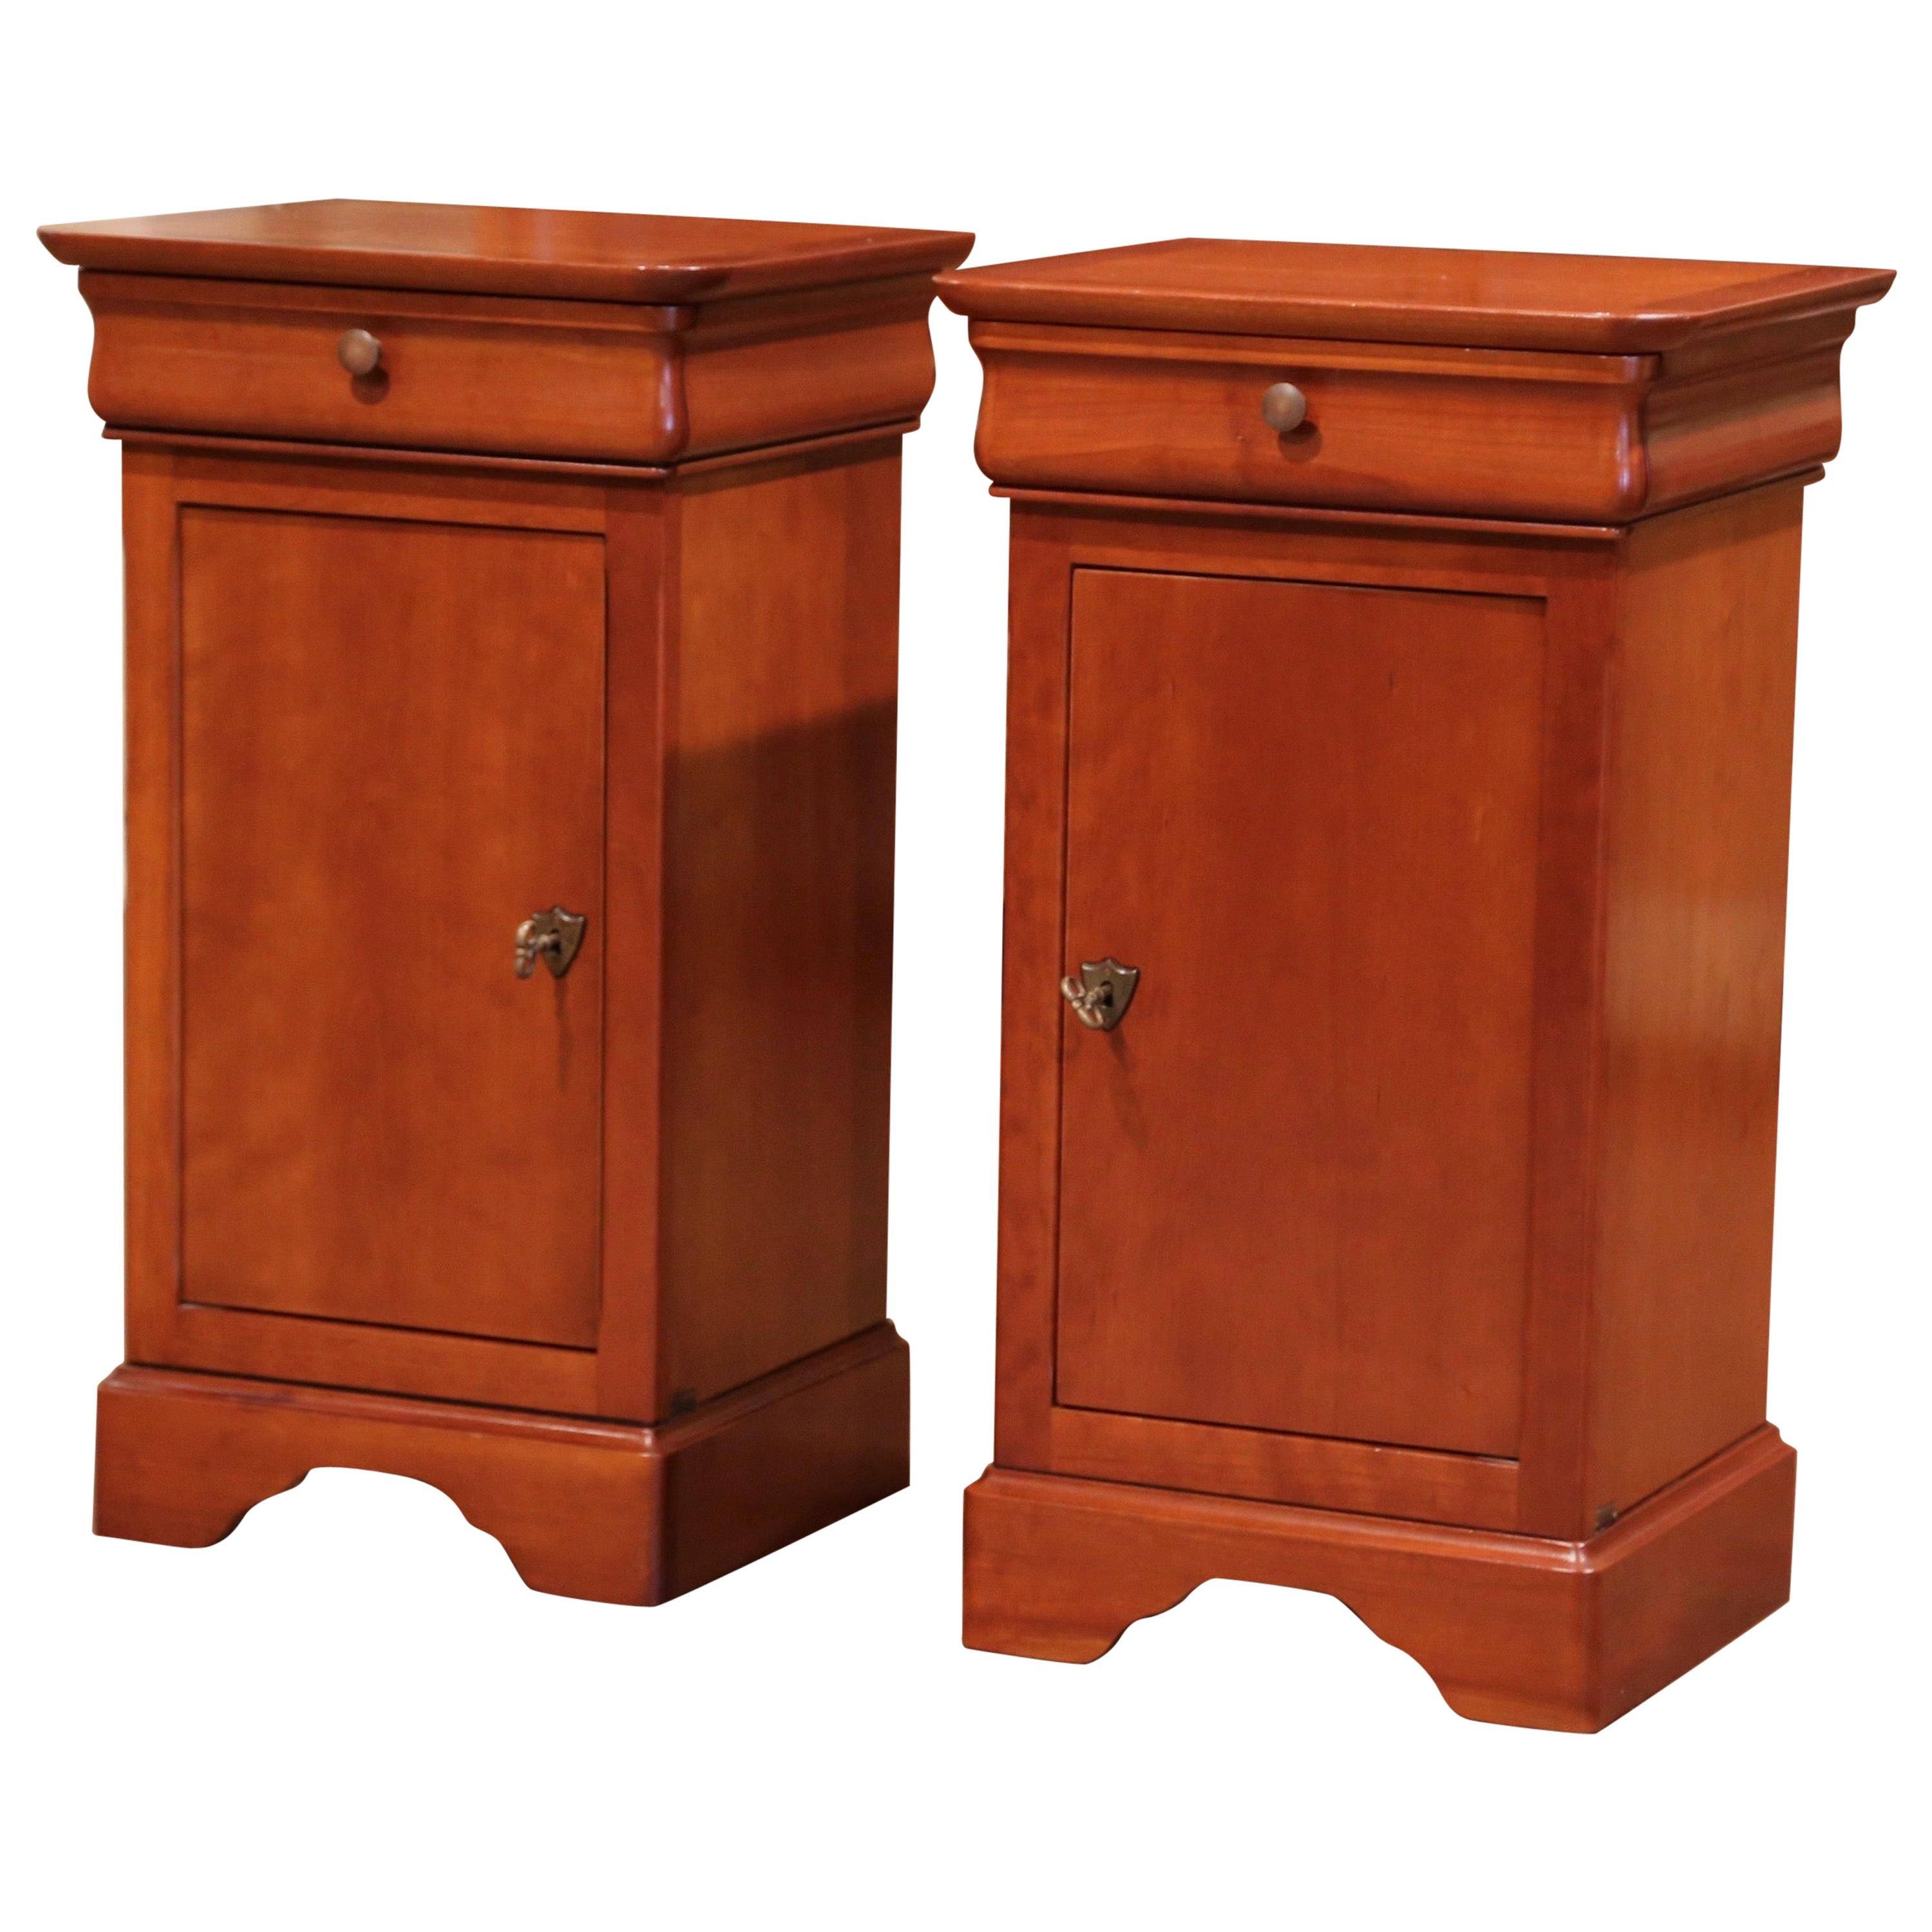  1pc Nightstand Cherry Finish Louis Philippe Solid Wood English  Dovetail Construction Antique Nickle Hanging Pulls : Home & Kitchen